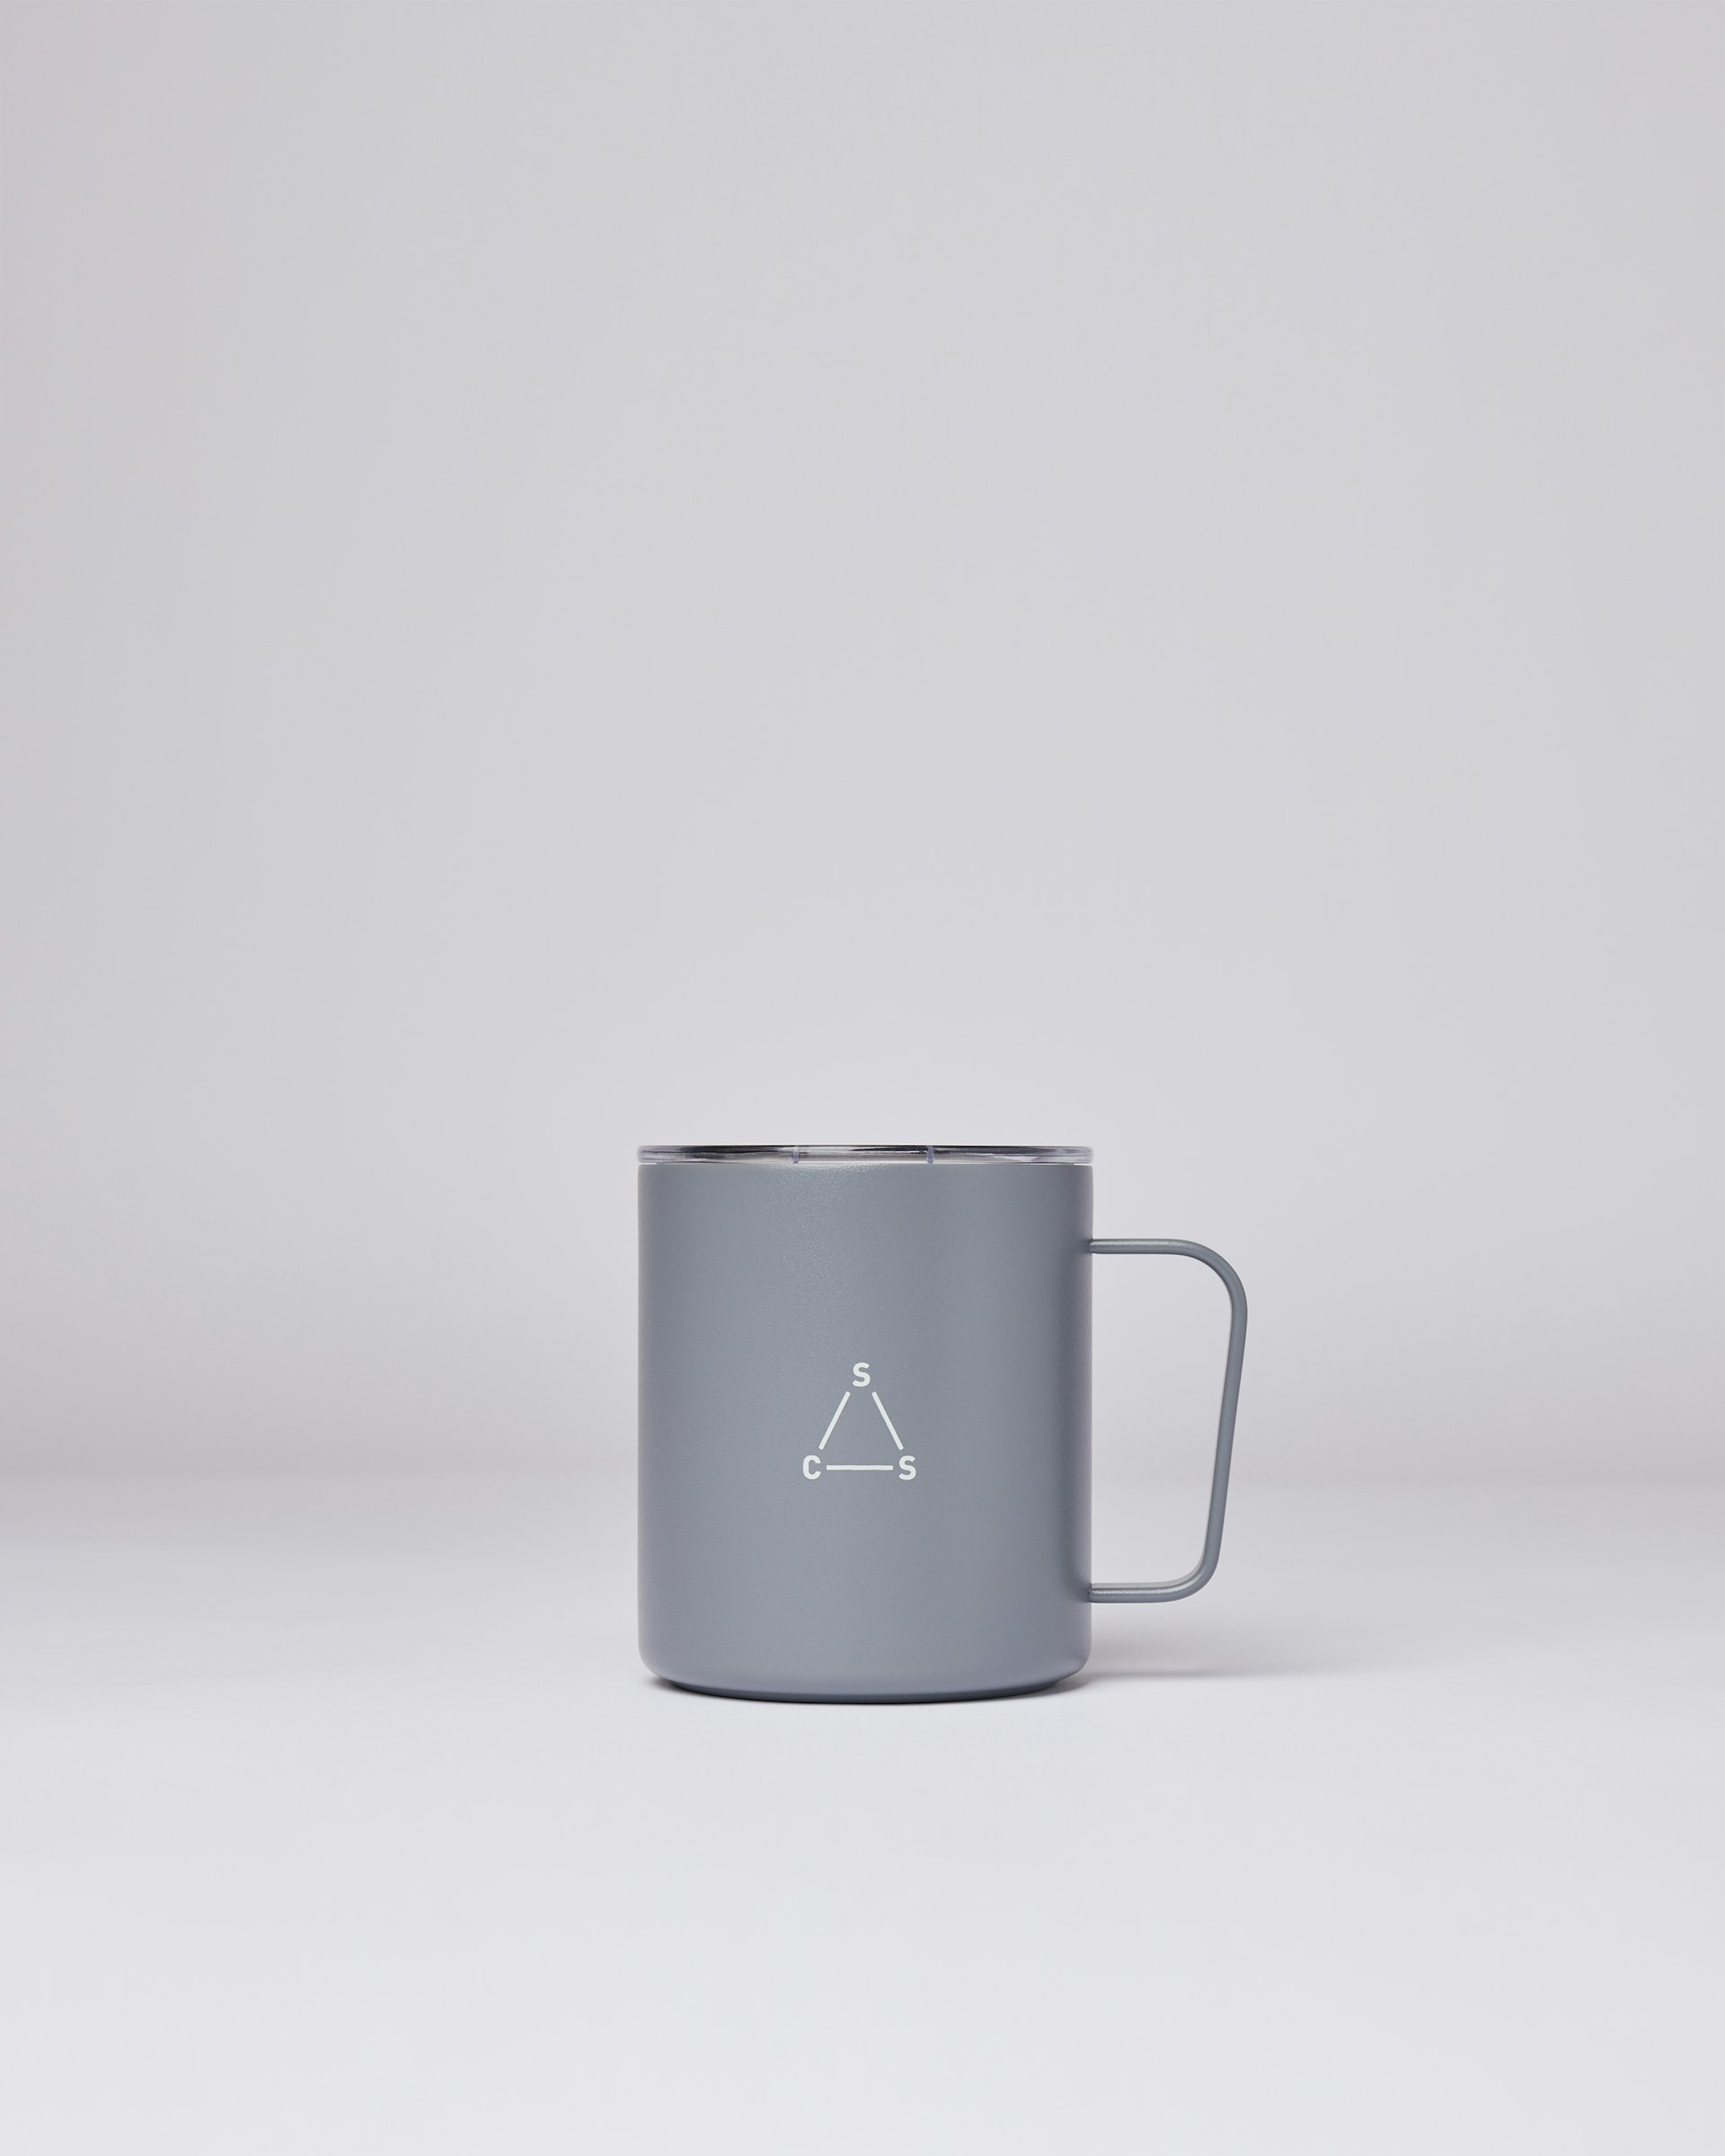 Camp Cup belongs to the category Items and is in color grey (1 of 3)